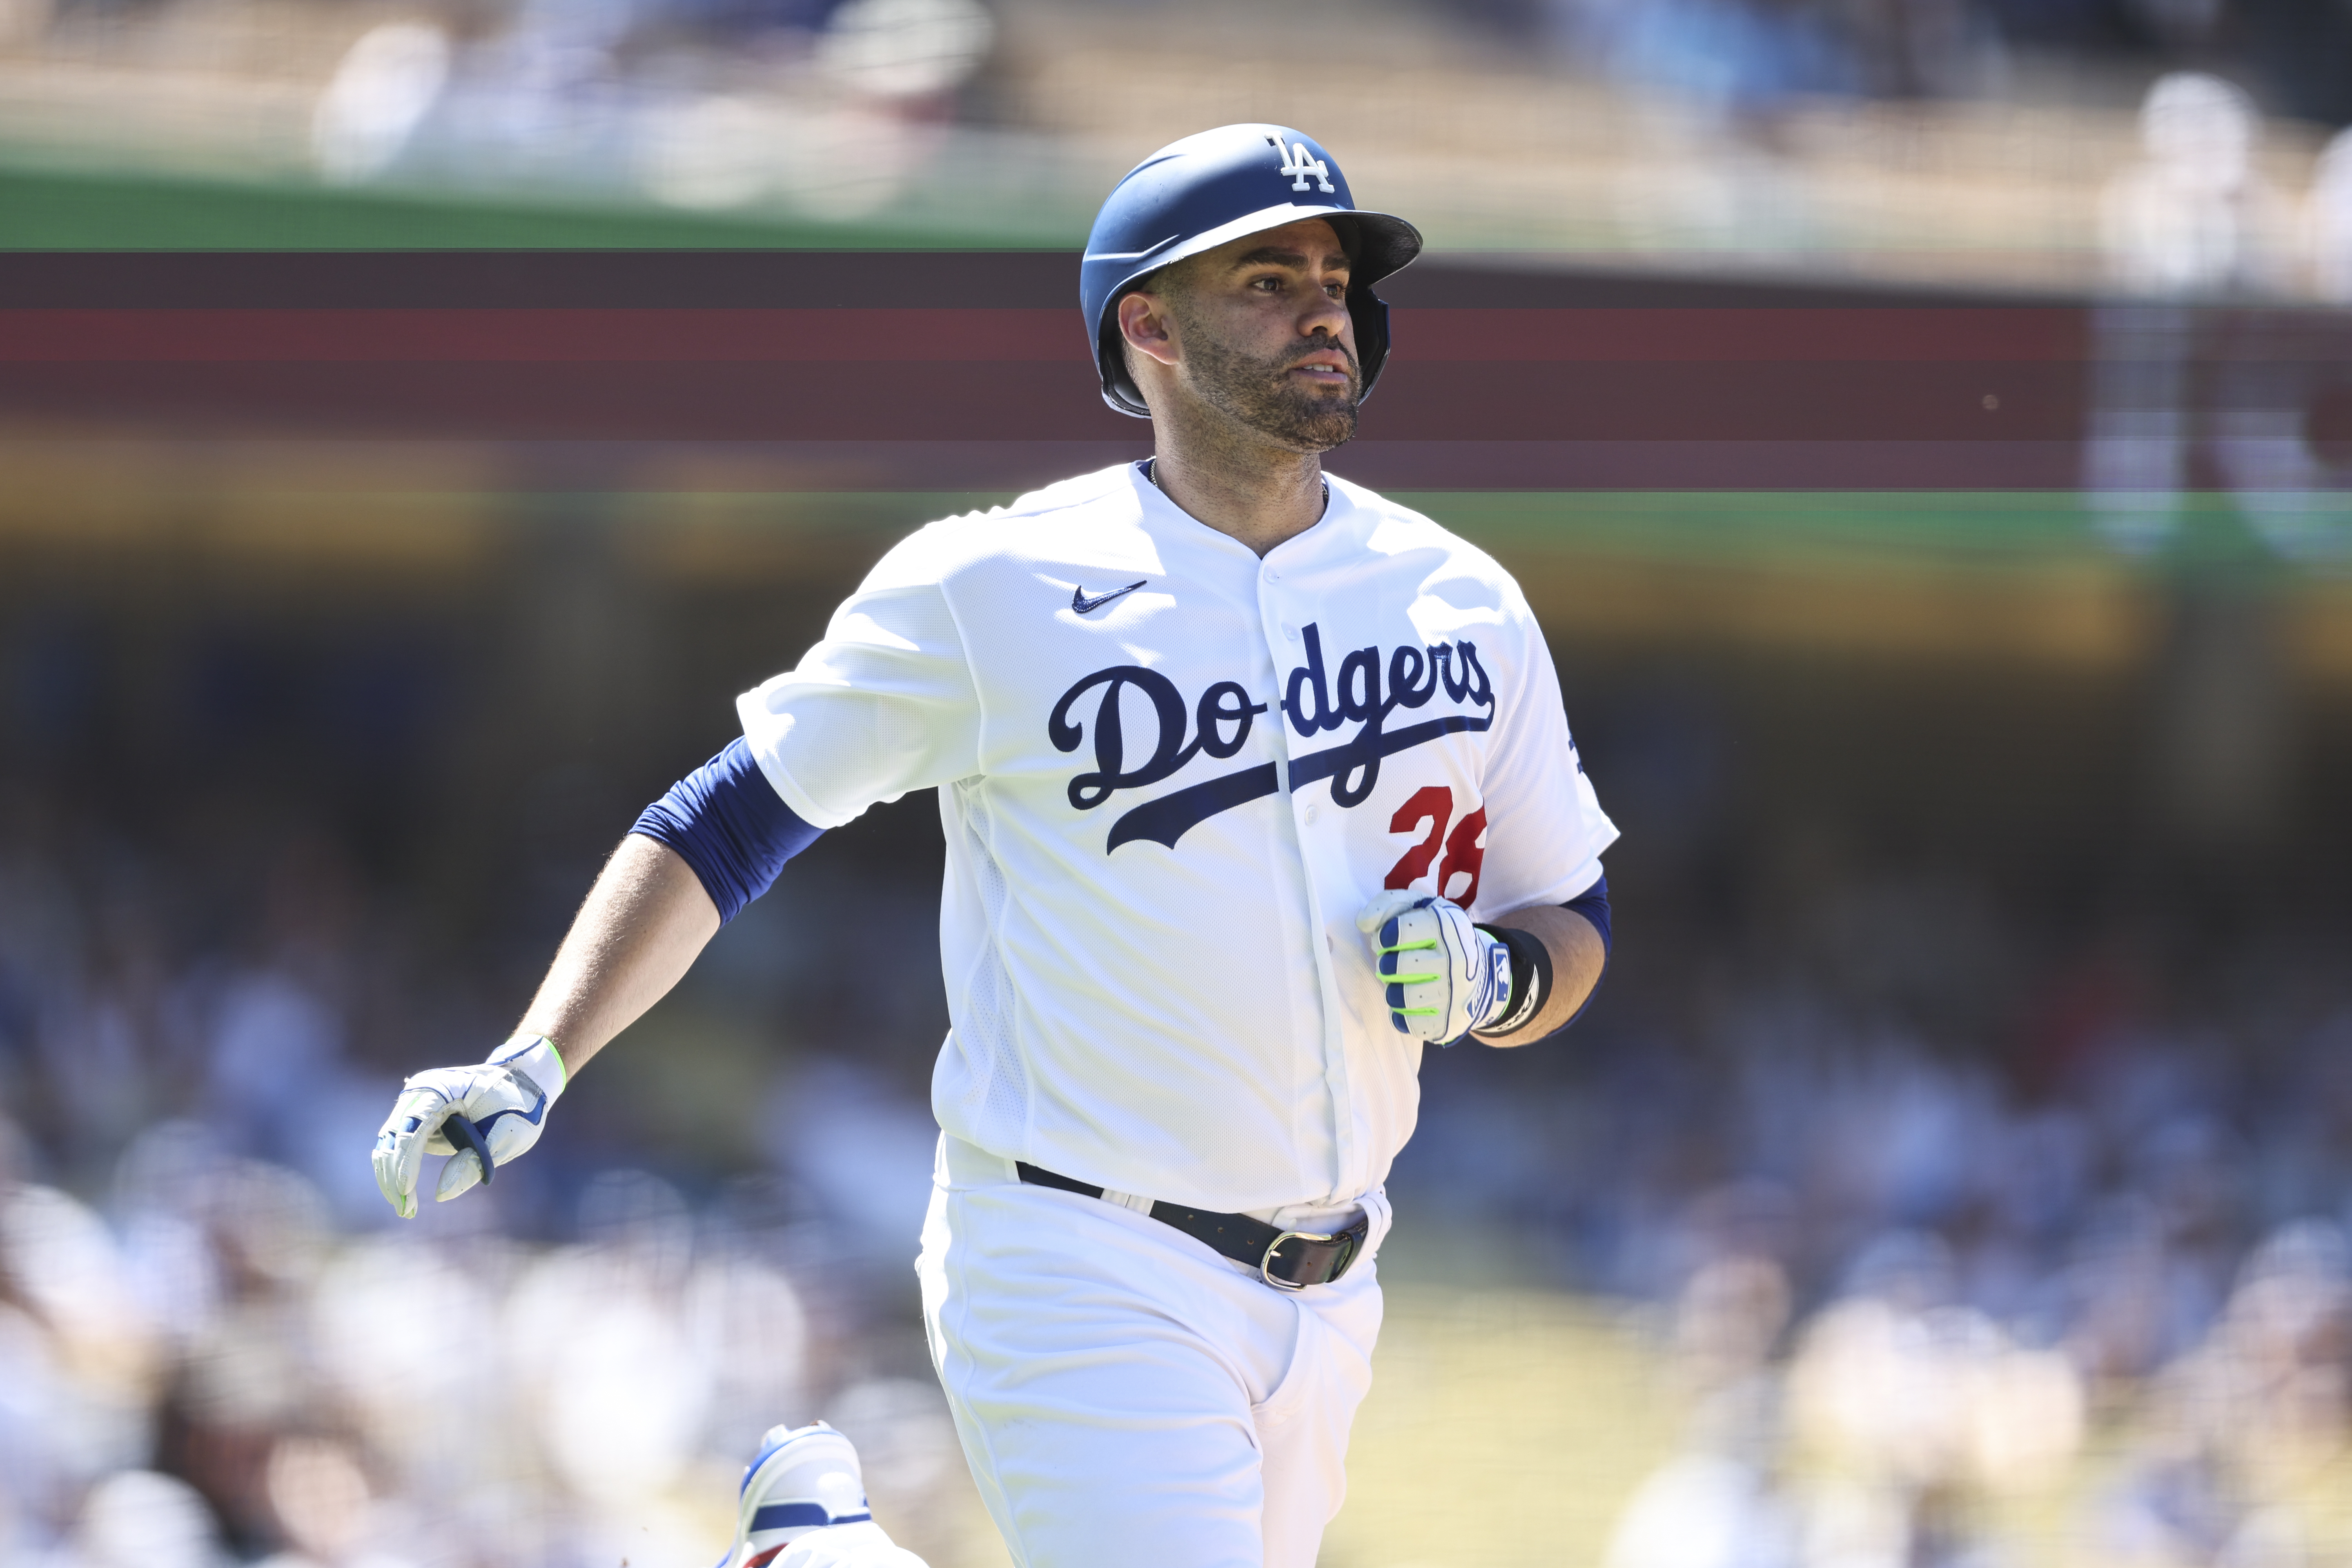 Dodgers beat Brewers 1-0 for 11th straight victory